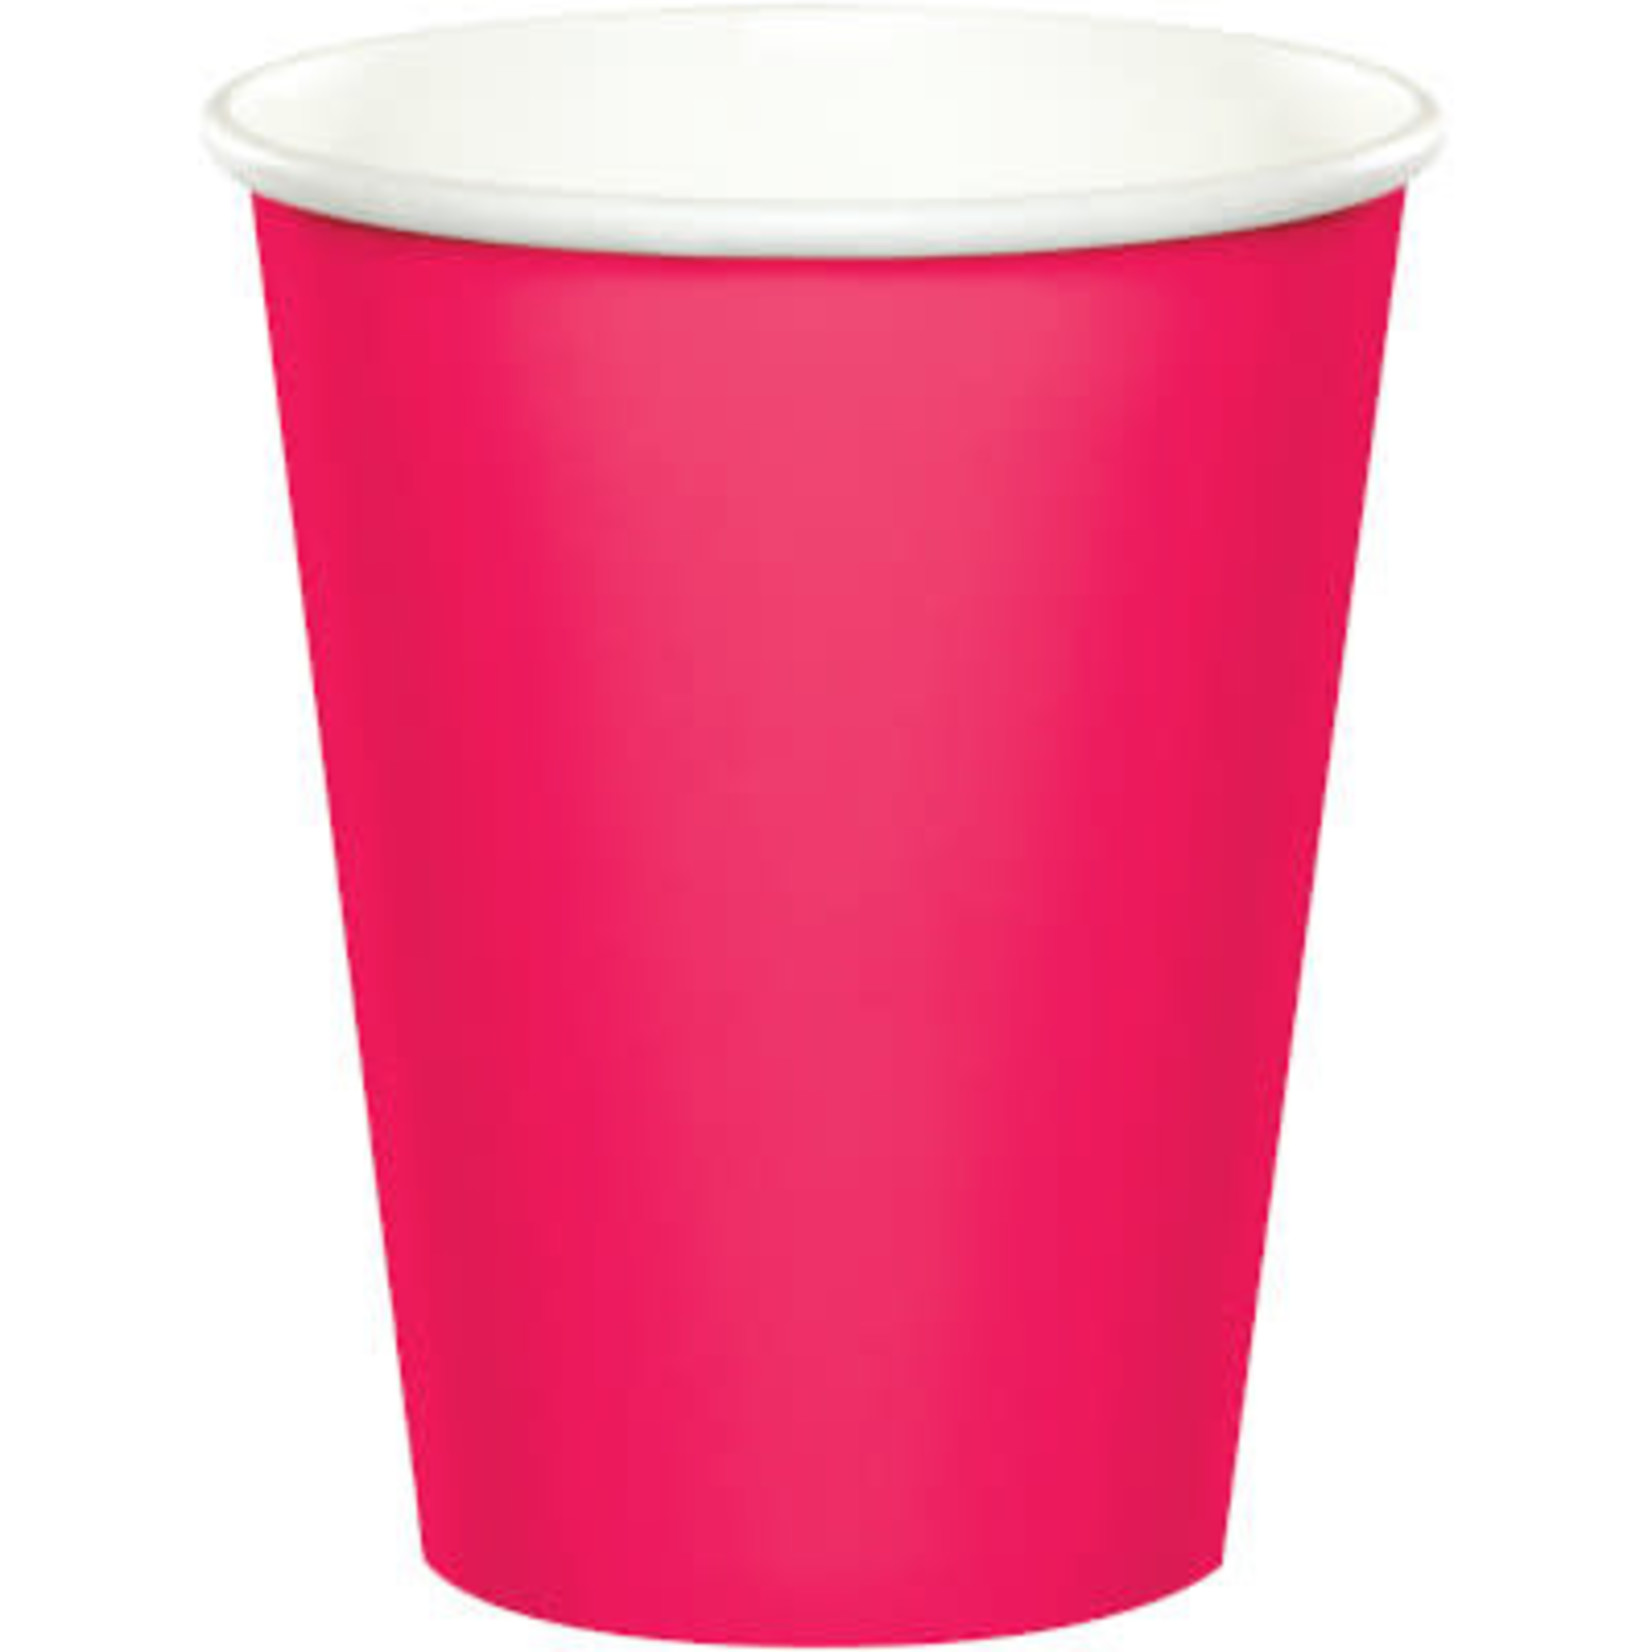 Touch of Color 9oz. Magenta Pink Hot/Cold Paper Cups - 24ct.